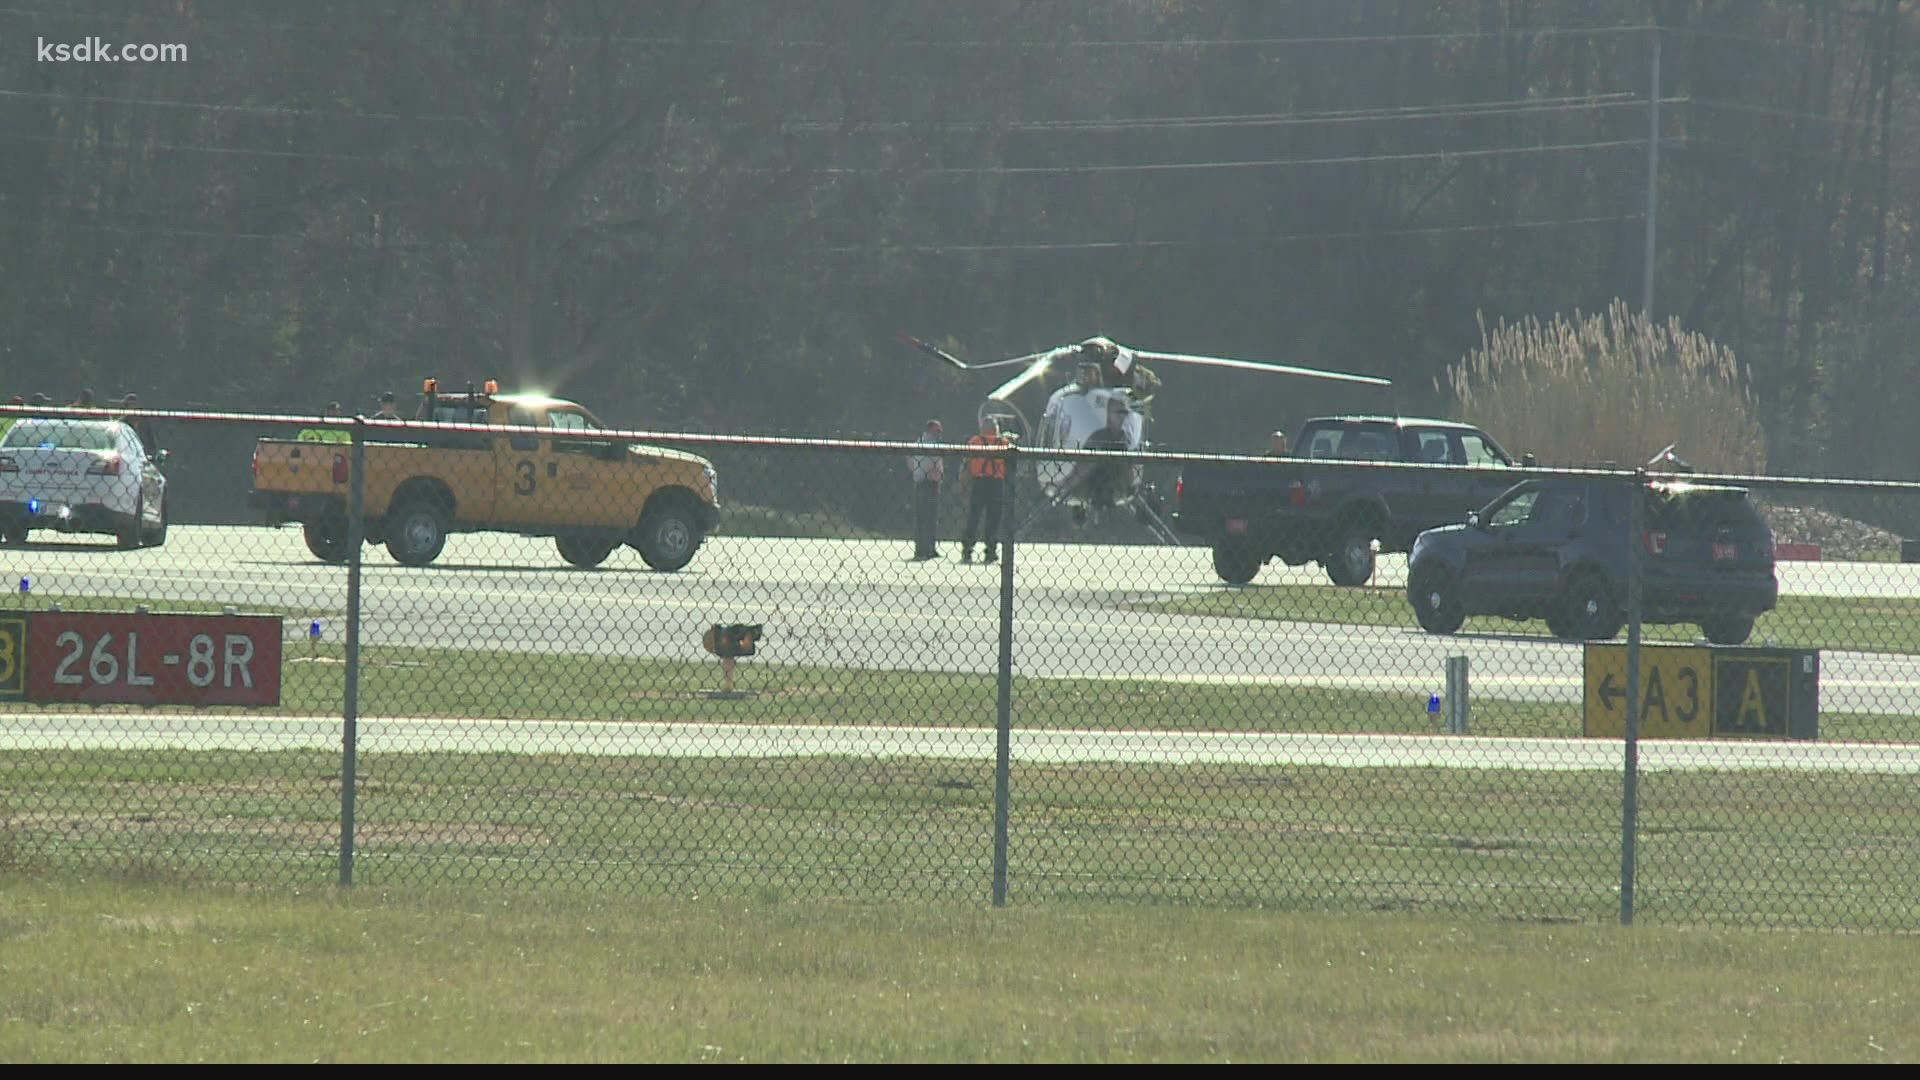 The crash happened on the main runway of the small airport in Chesterfield. There was minor damage to the helicopter.